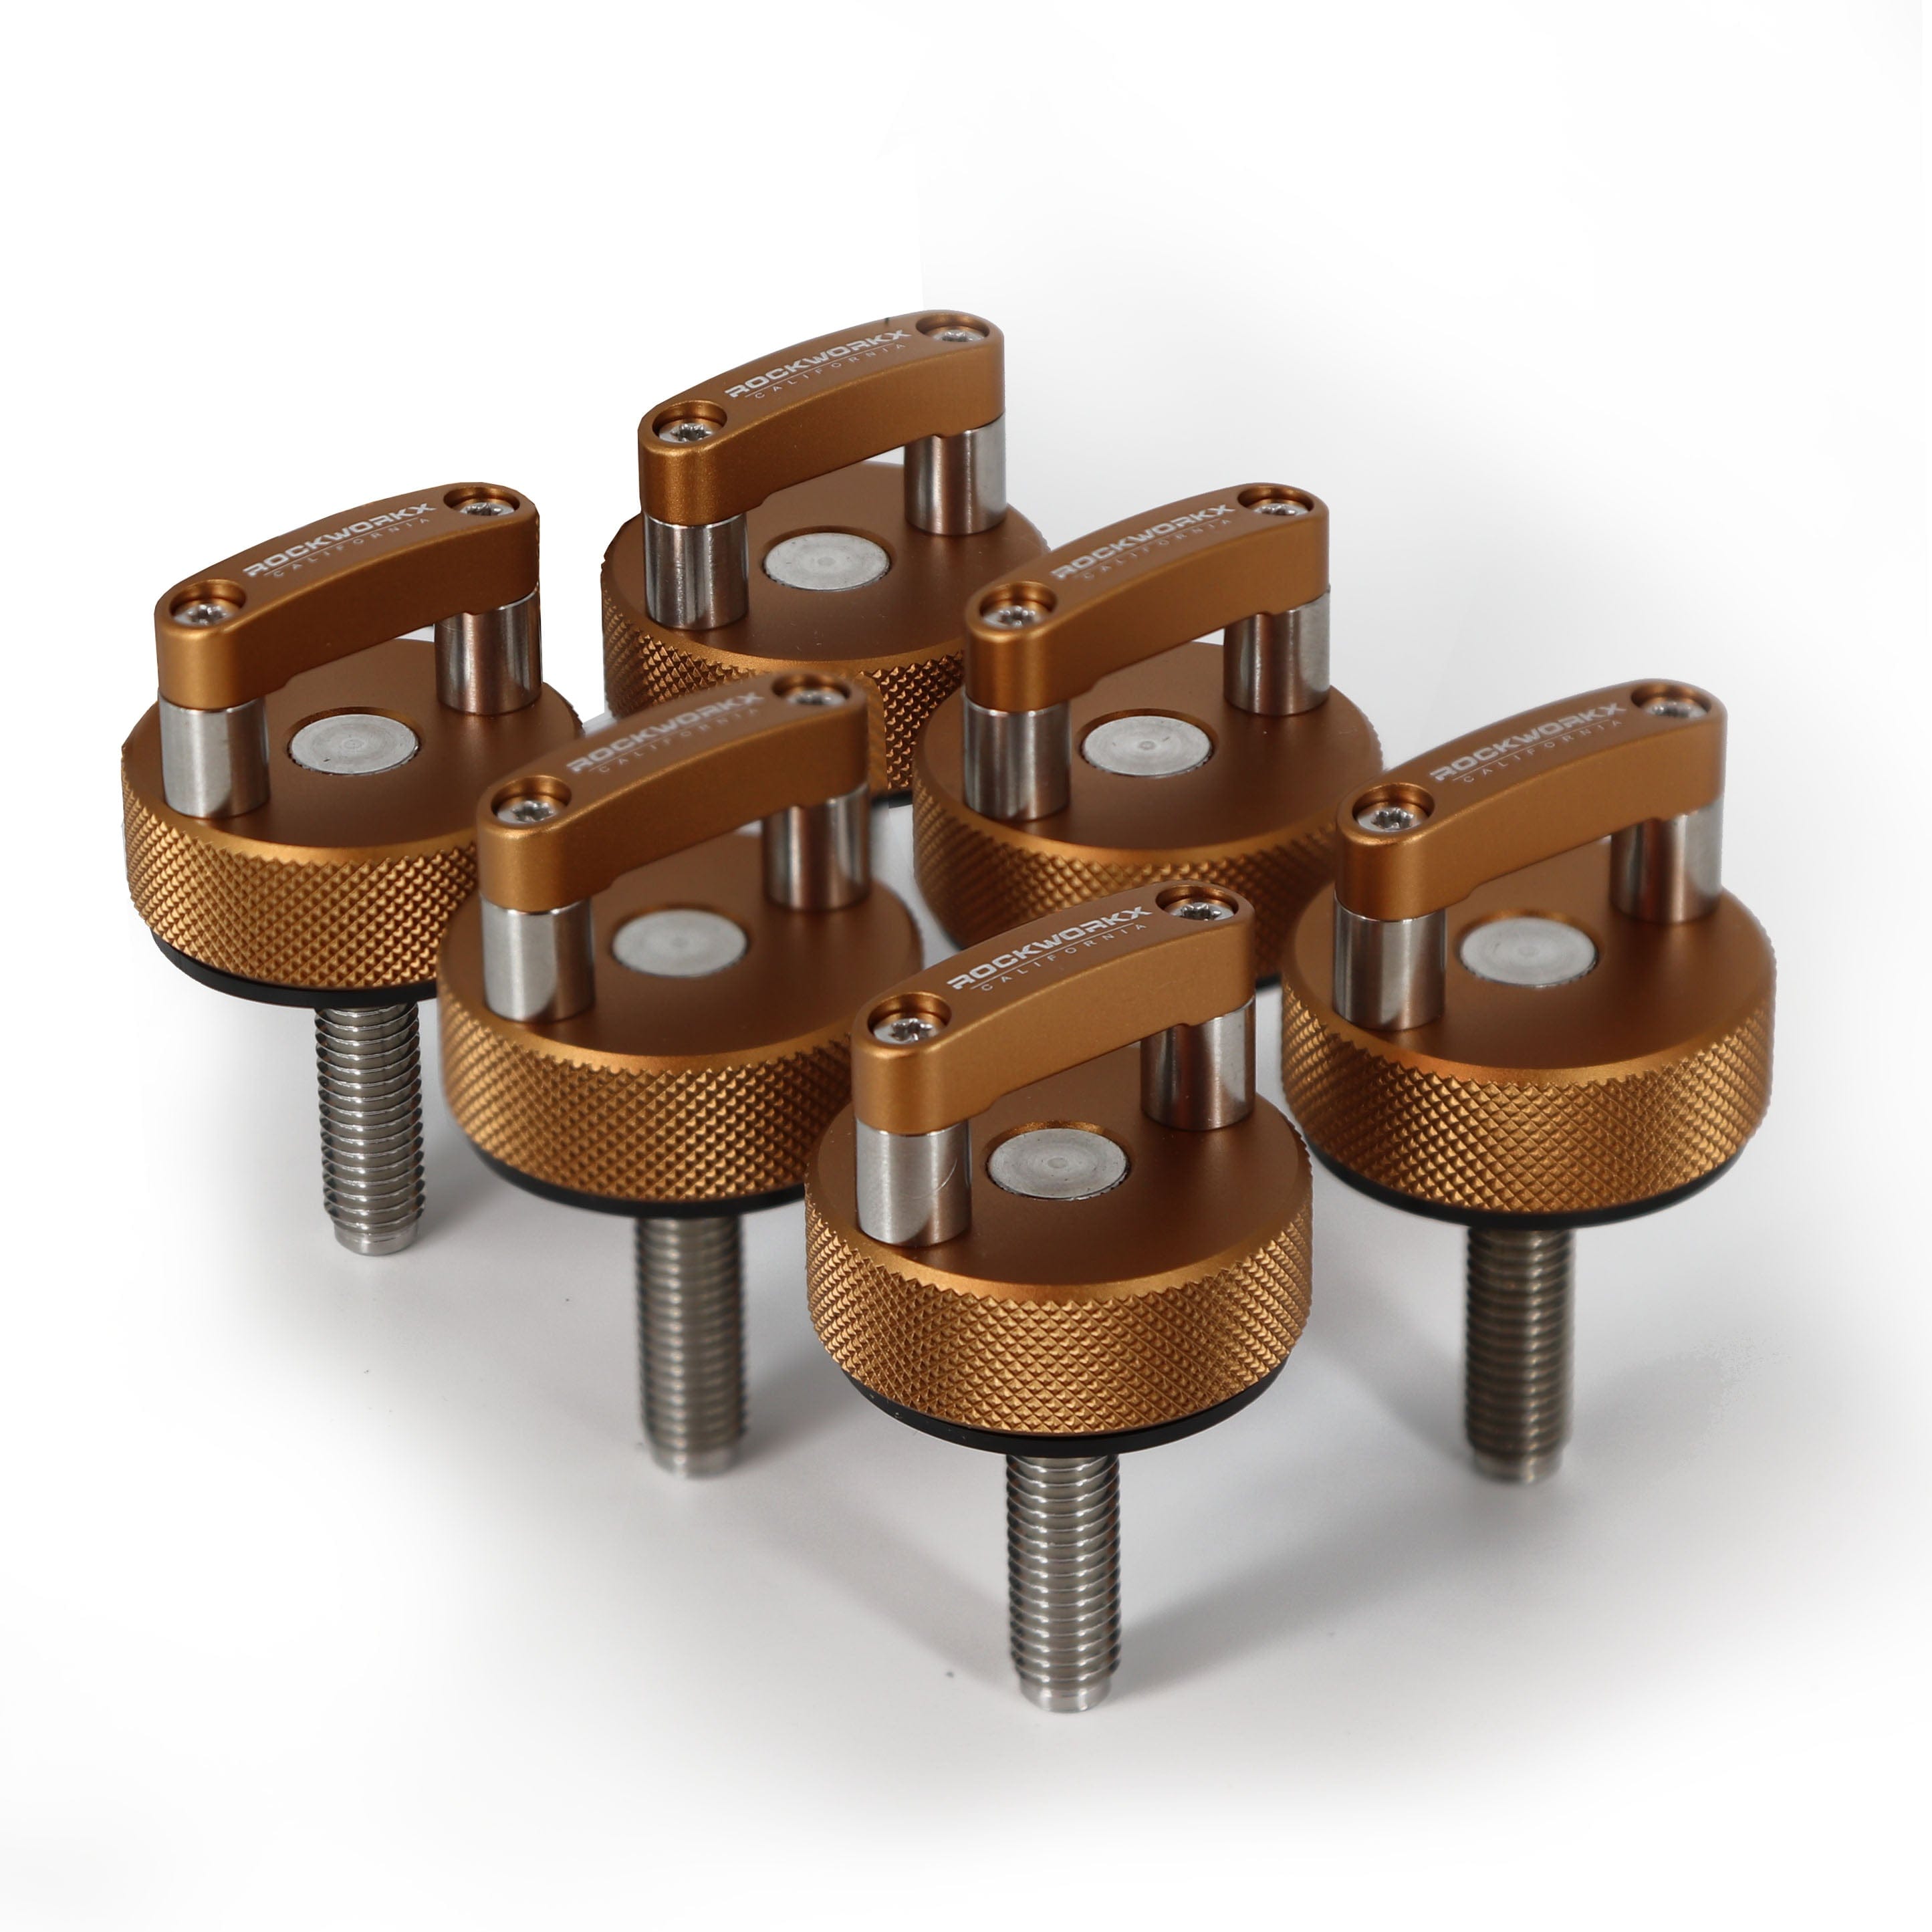 AVAILABLE NOW- JEEP WRANGLER Hard Top Quick Removal Fastener Thumb Screw (Six Piece Set) LIMITED EDITION COPPER, Billet aluminum & Stainless steel rockworkx